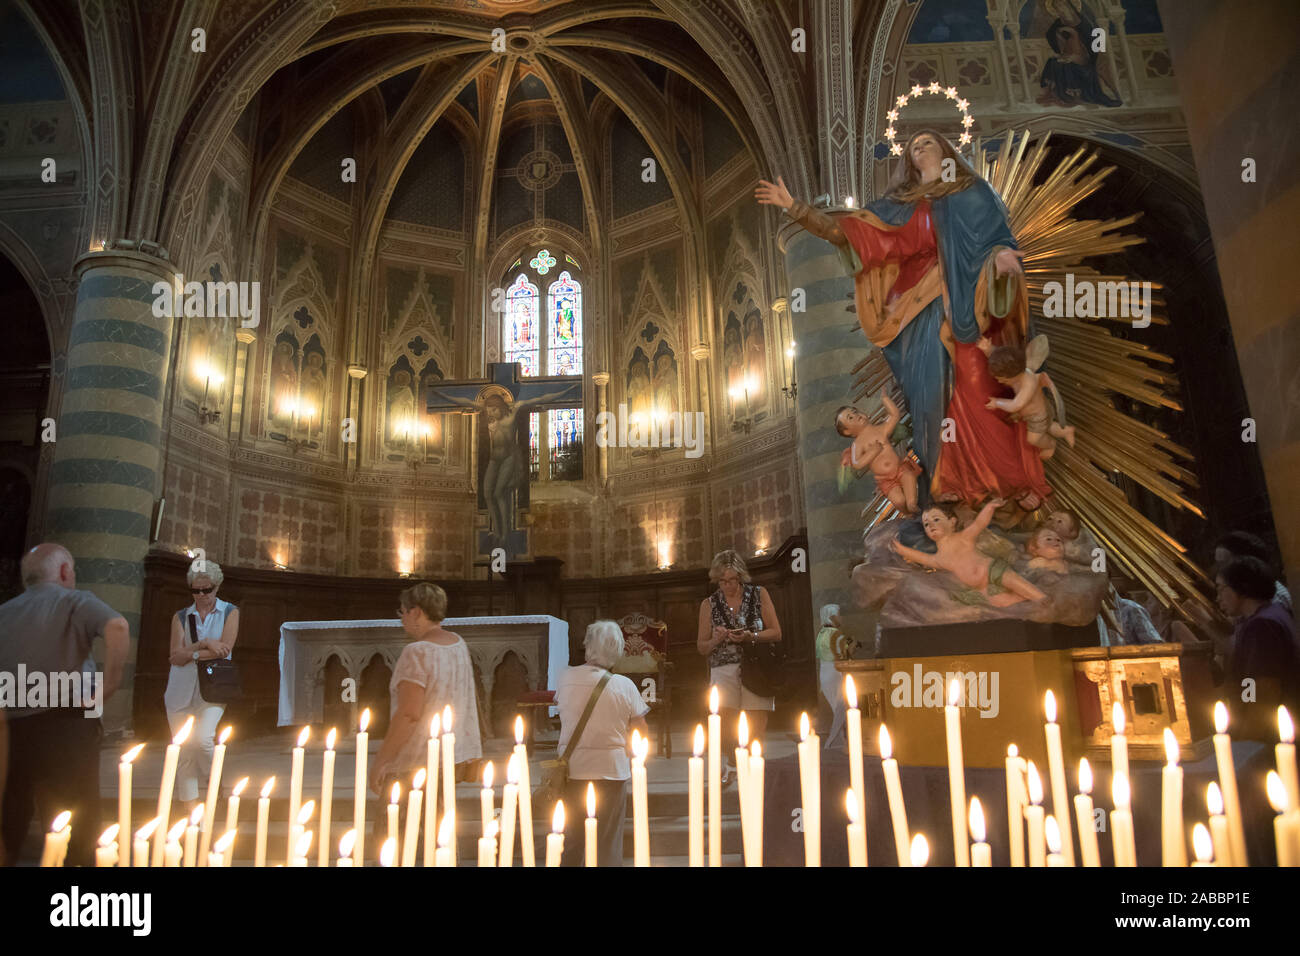 Santandrea Church High Resolution Stock Photography and Images - Alamy